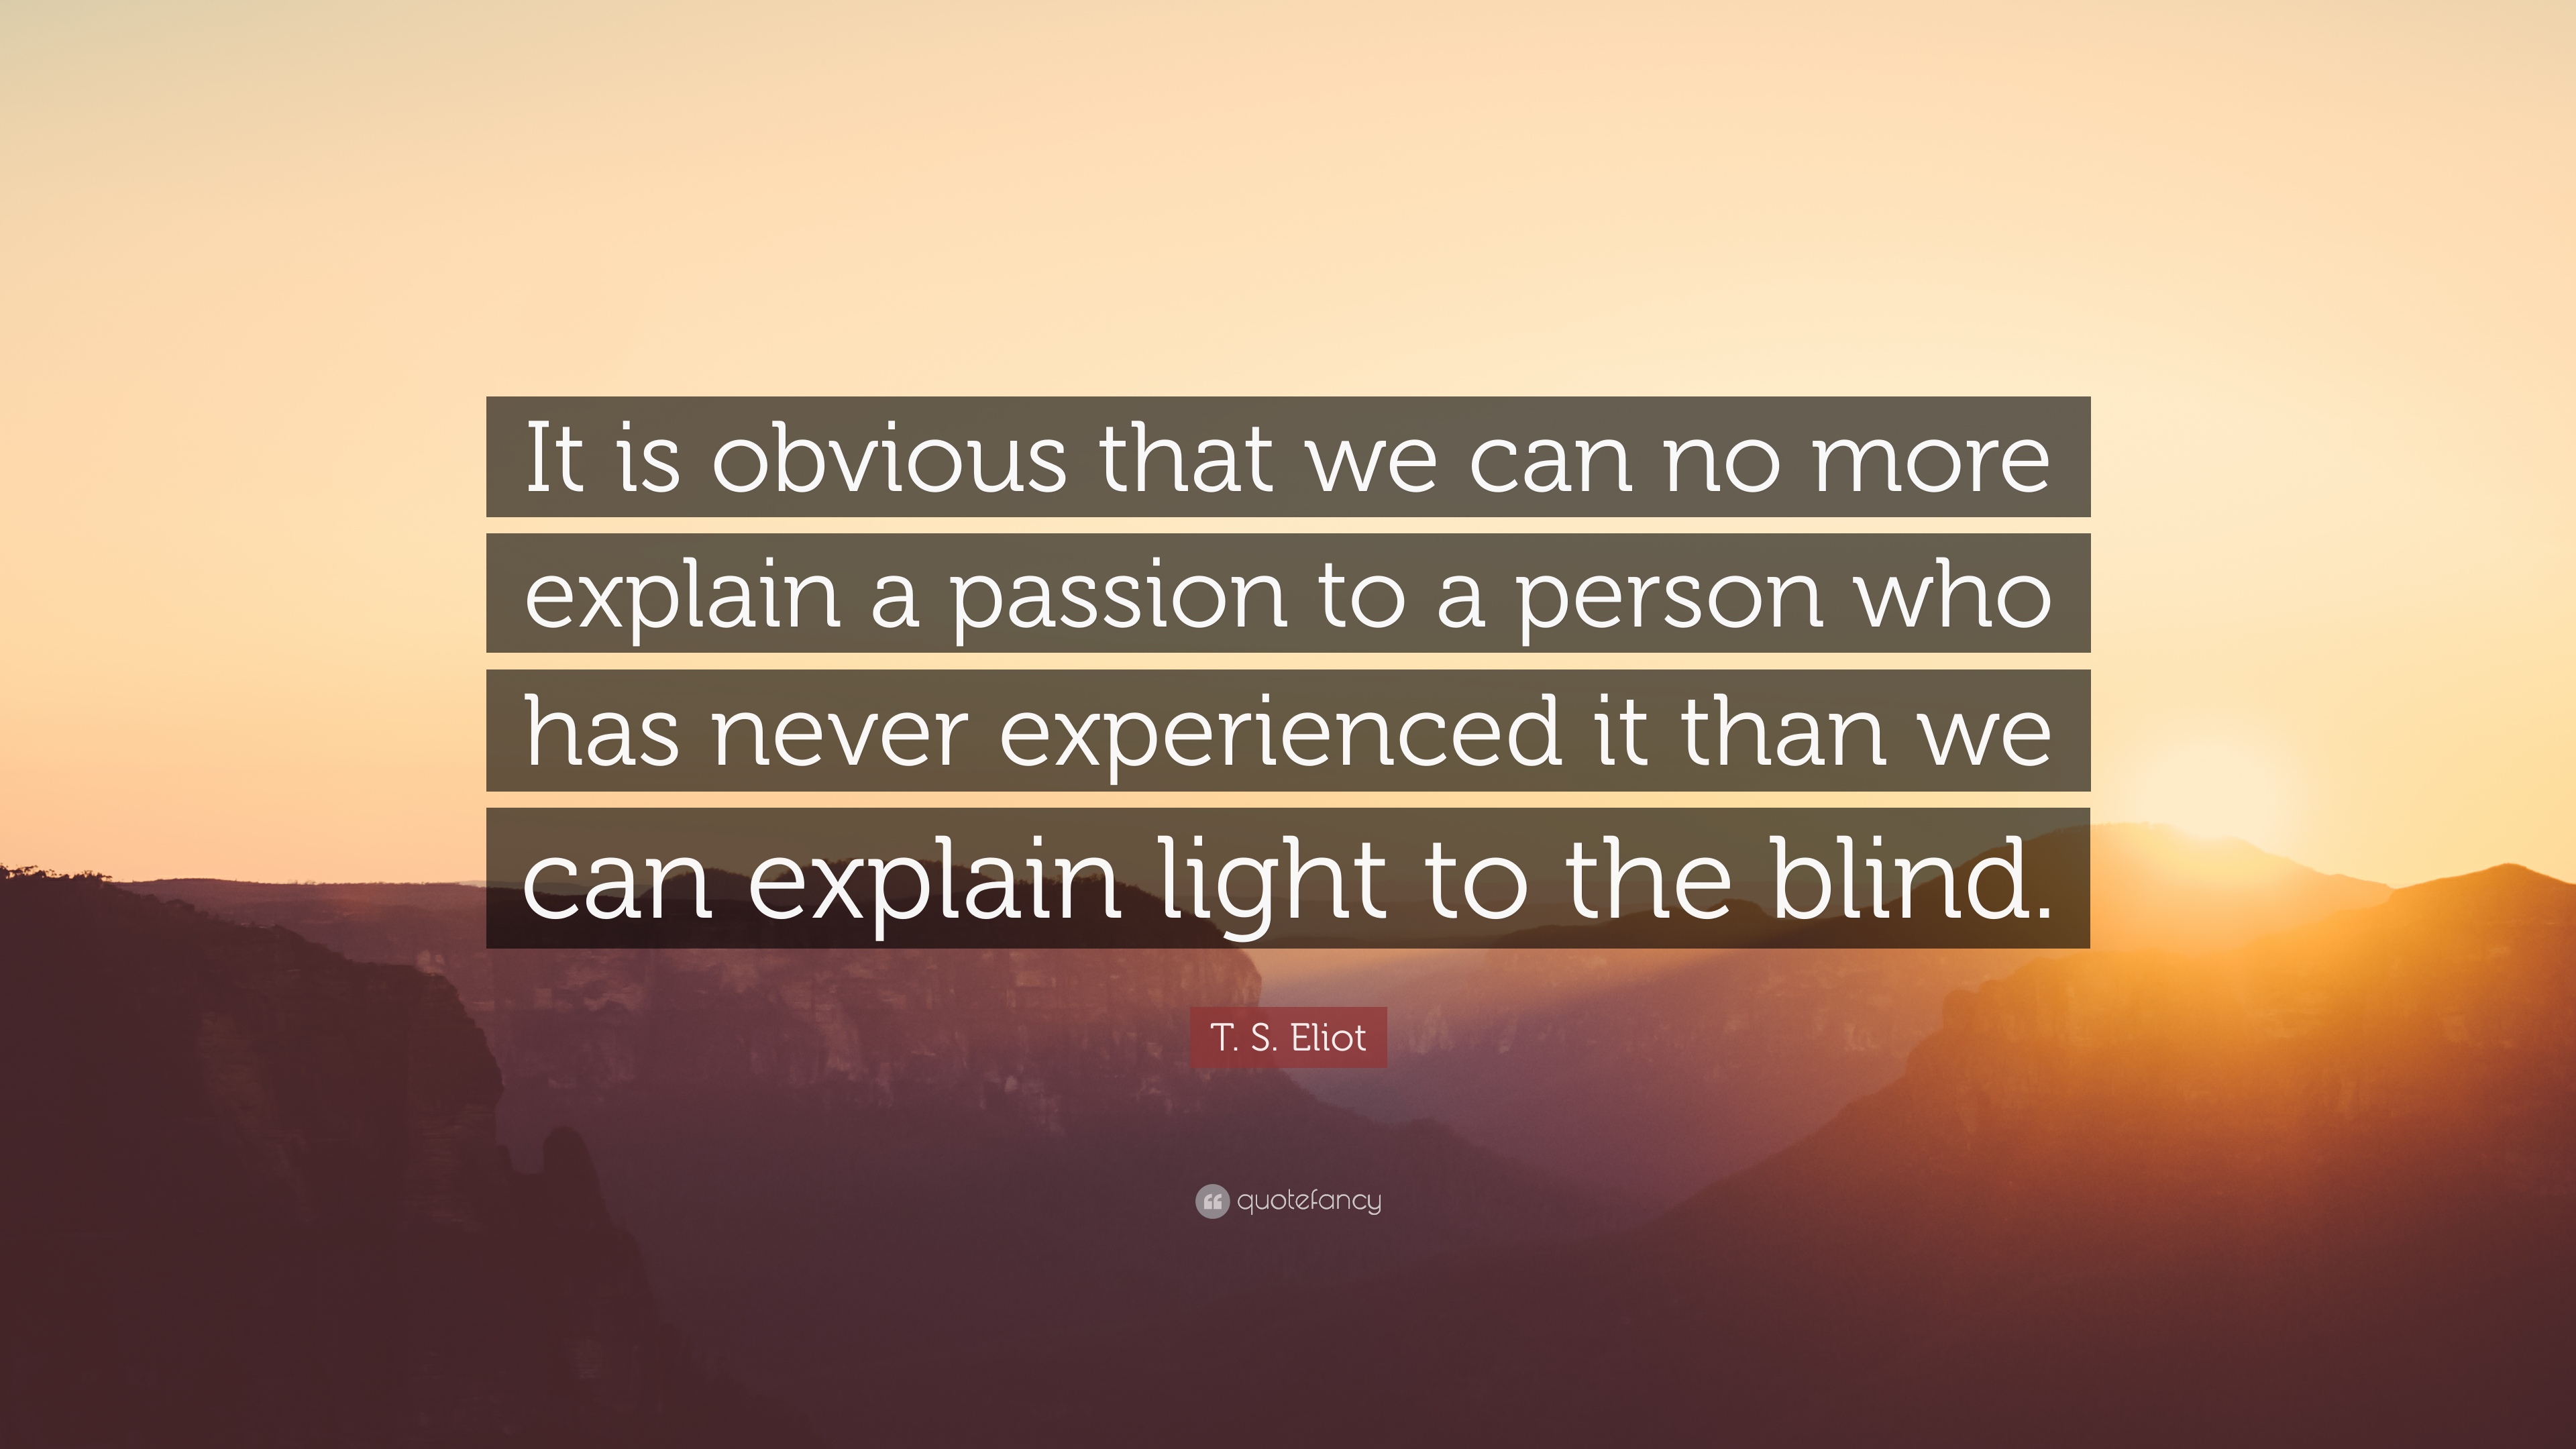 T. S. Eliot Quote: “It is obvious that we can no more explain a ...